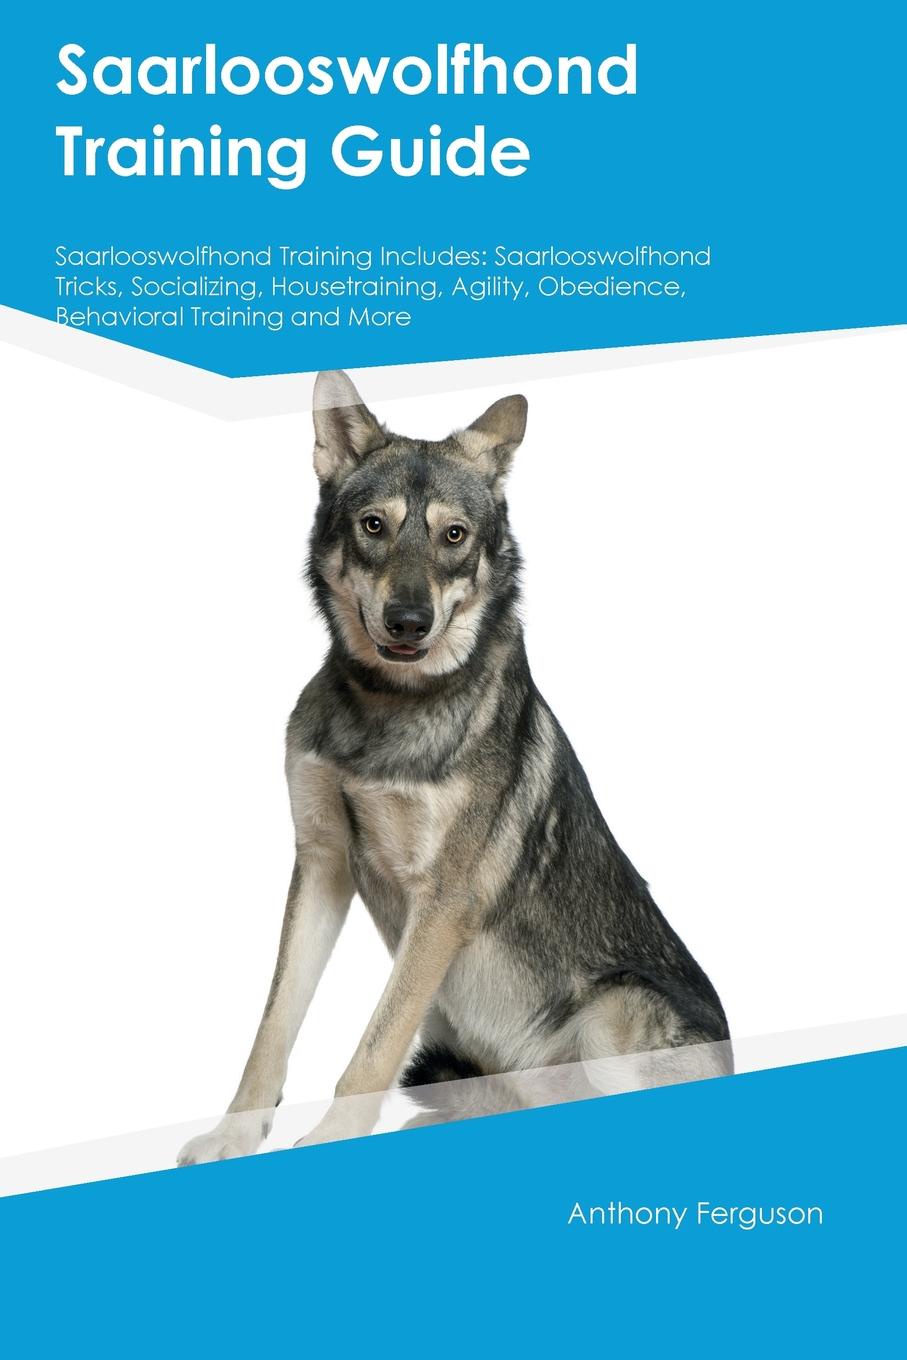 Saarlooswolfhond Training Guide Saarlooswolfhond Training Includes. Saarlooswolfhond Tricks, Socializing, Housetraining, Agility, Obedience, Behavioral Training and More